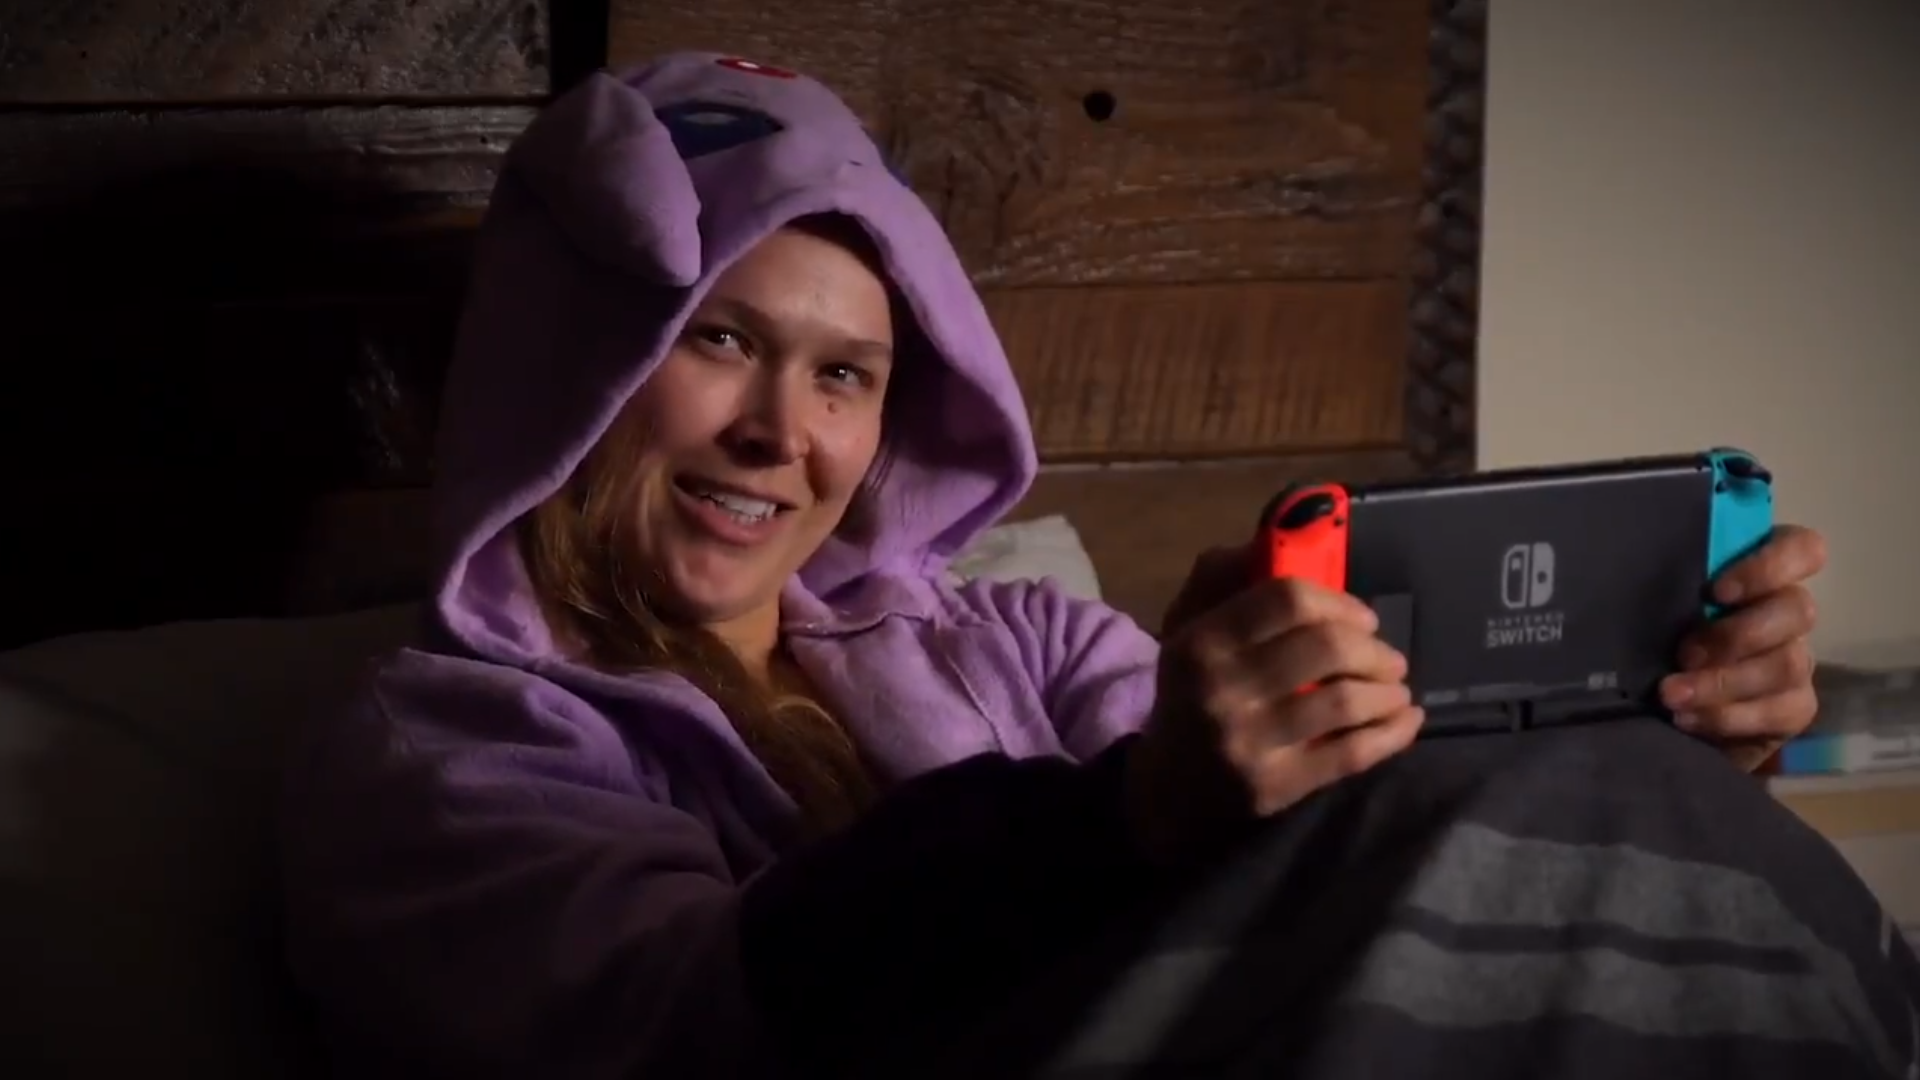 Even Ronda Rousey Has An Exclusive Video Game Streaming Deal Now